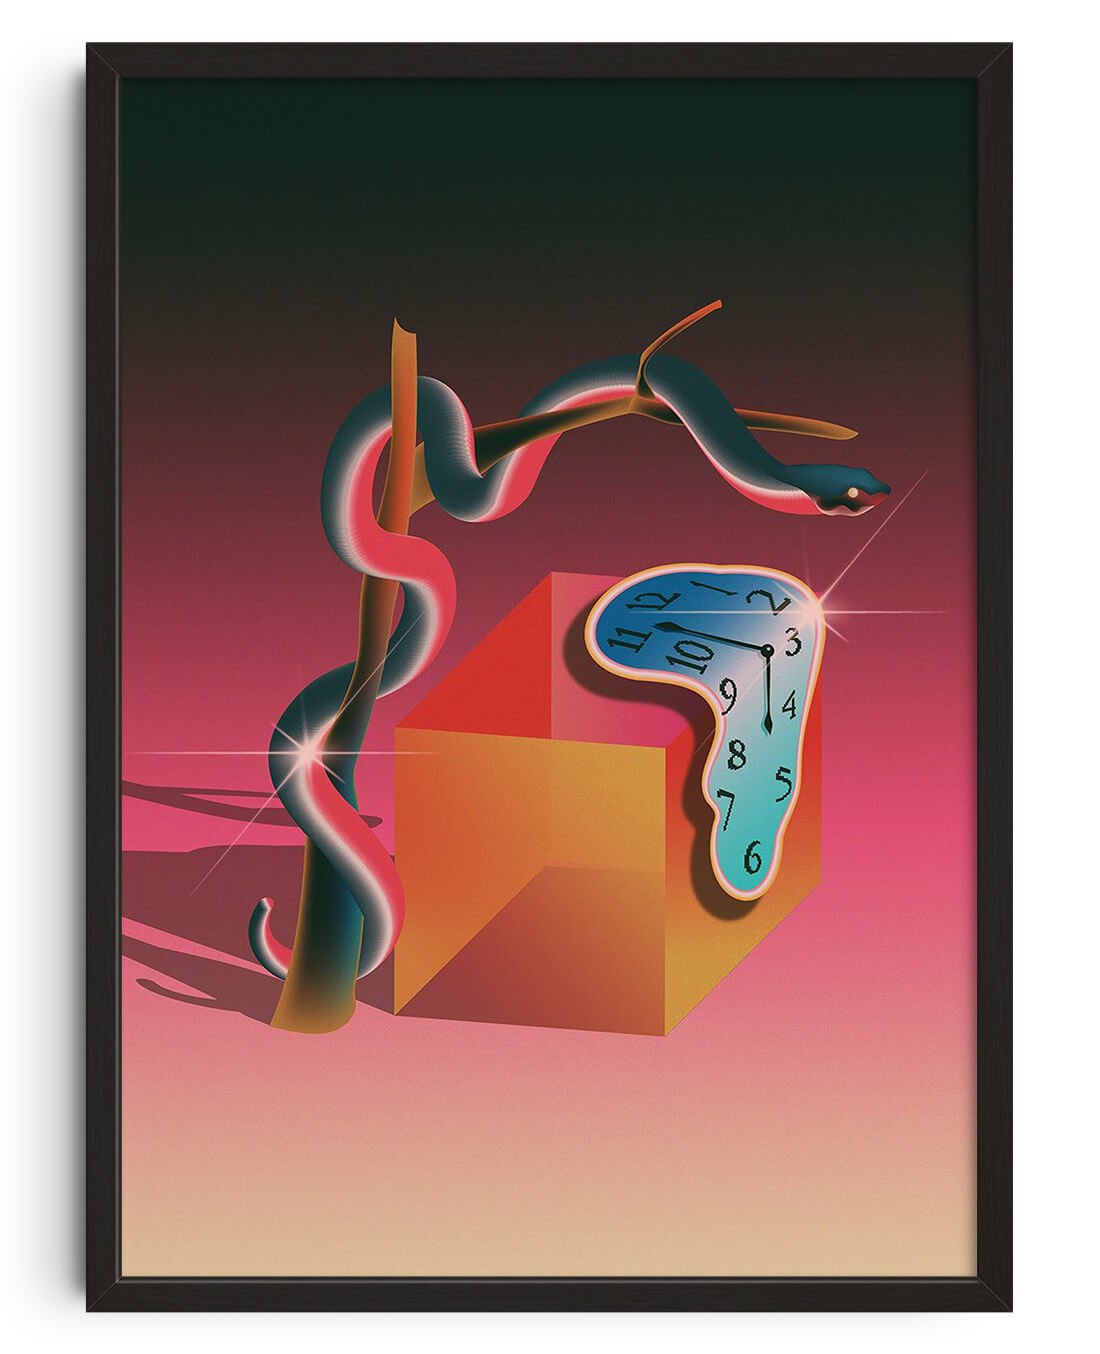 The Persistence of Pink by Paulina Almira contemporary wall art print from DROOL